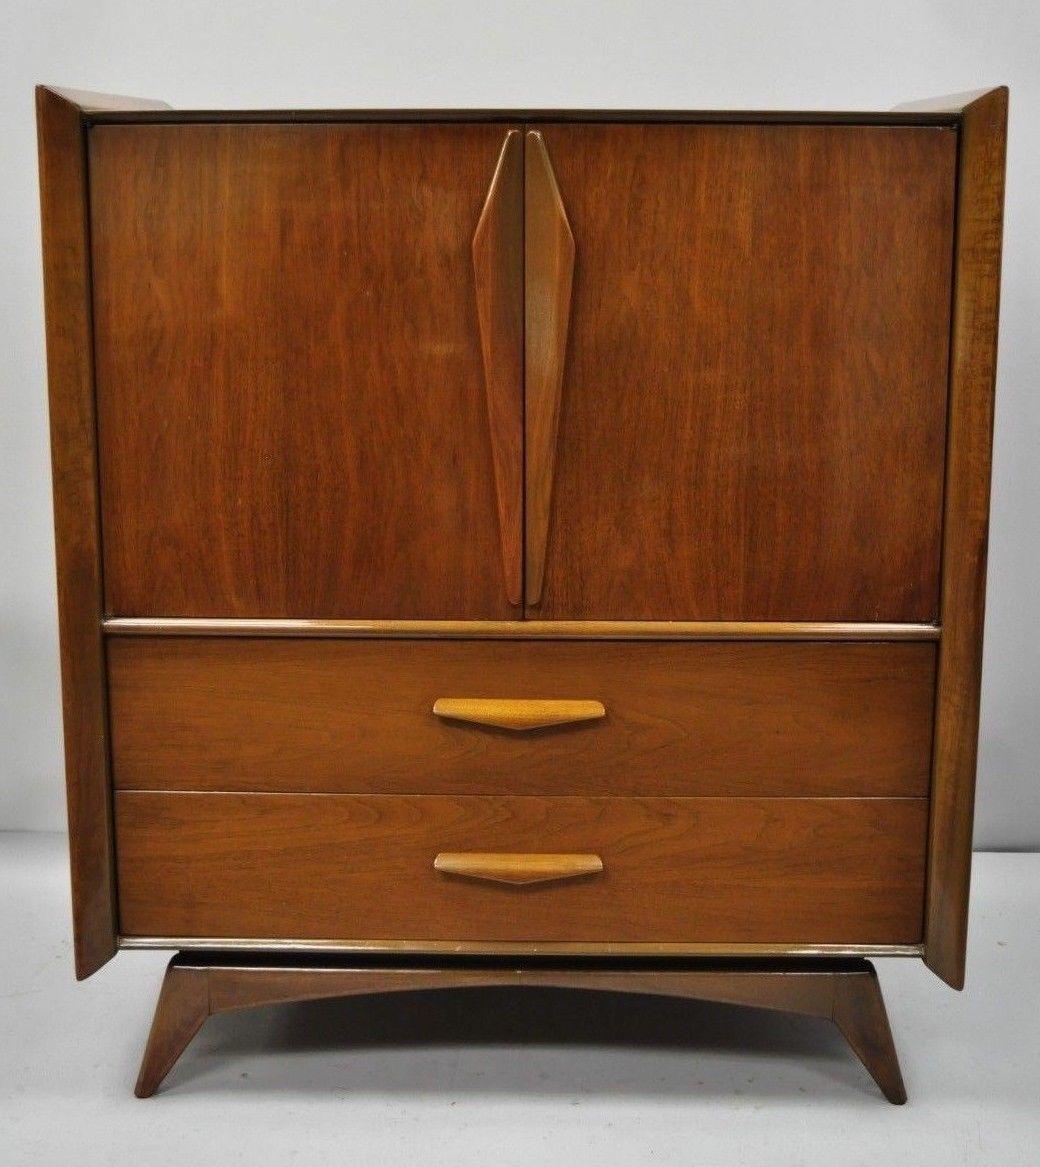 Mid-Century Modern sculpted walnut tall chest dresser. Item features raised panel sculpted wood sides, sculpted wood pulls, angled and tapered legs, two cabinet doors, beautiful wood grain, 5 drawers, sleek sculptural form. circa mid-20th century.